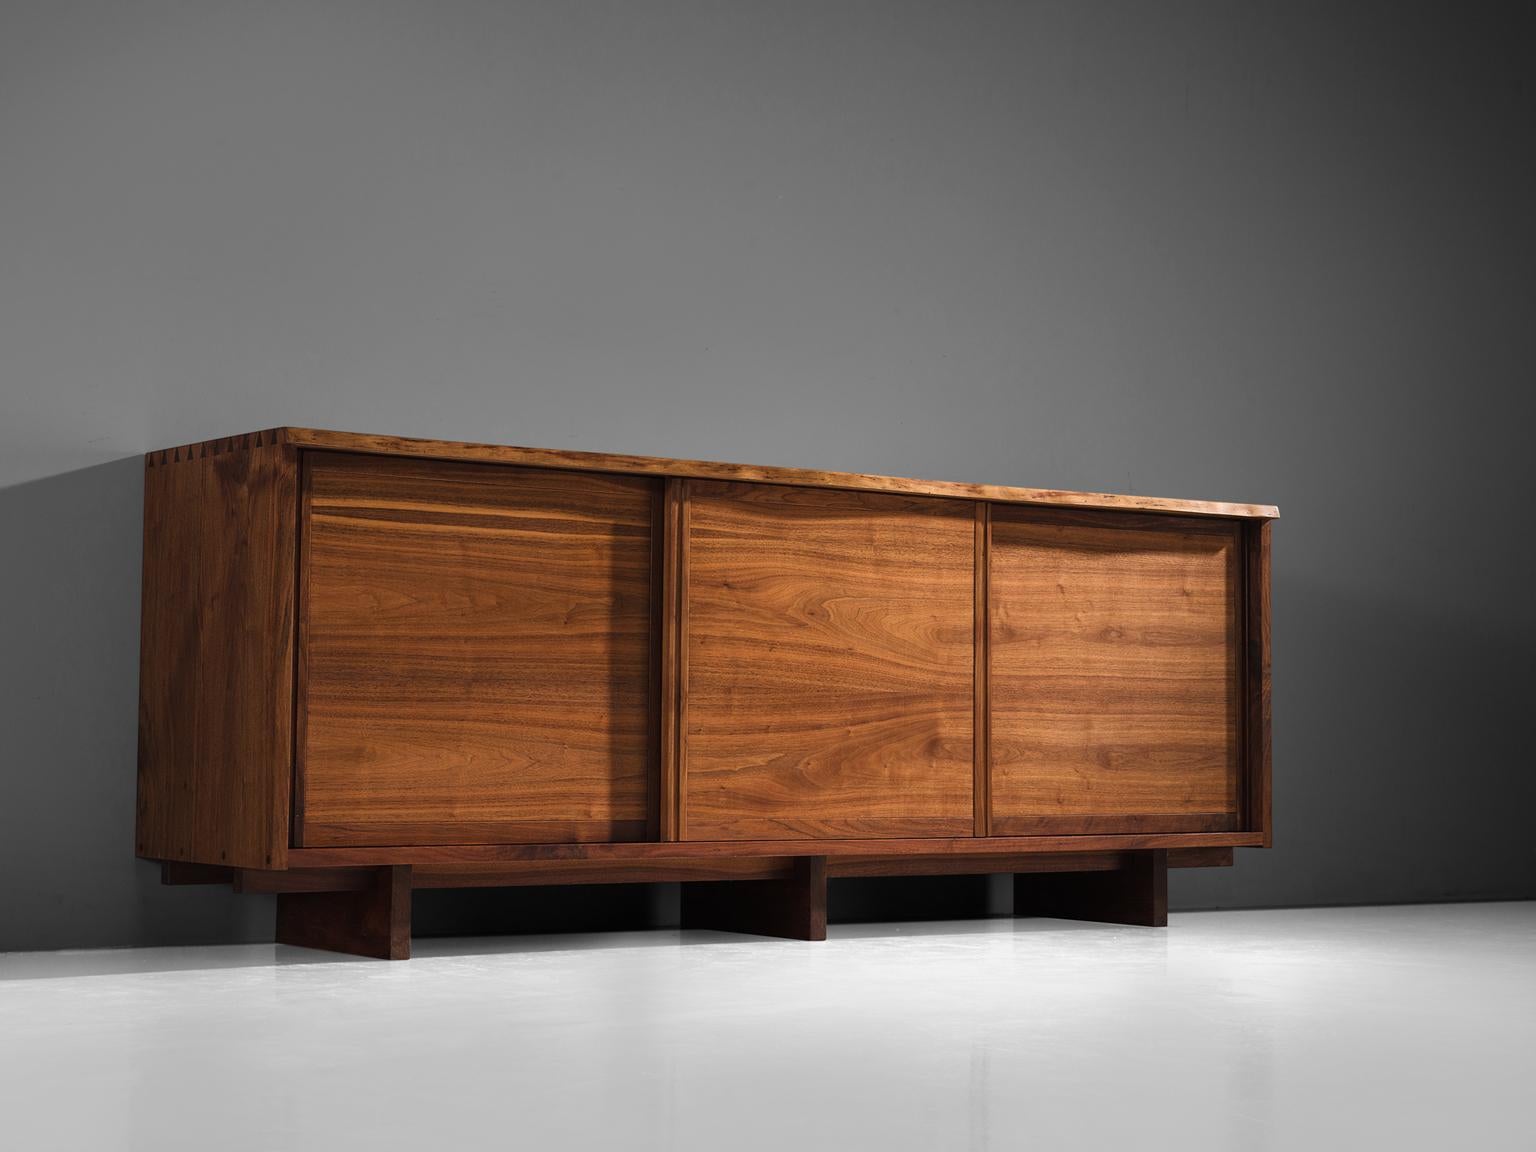 George Nakashima triple sliding door cabinet, made in walnut, United States, 1963. 

Cabinet with three sliding doors and four drawers behind each door, executed in walnut with traditional and archetypical dovetail Nakashima wood-joints. The top of